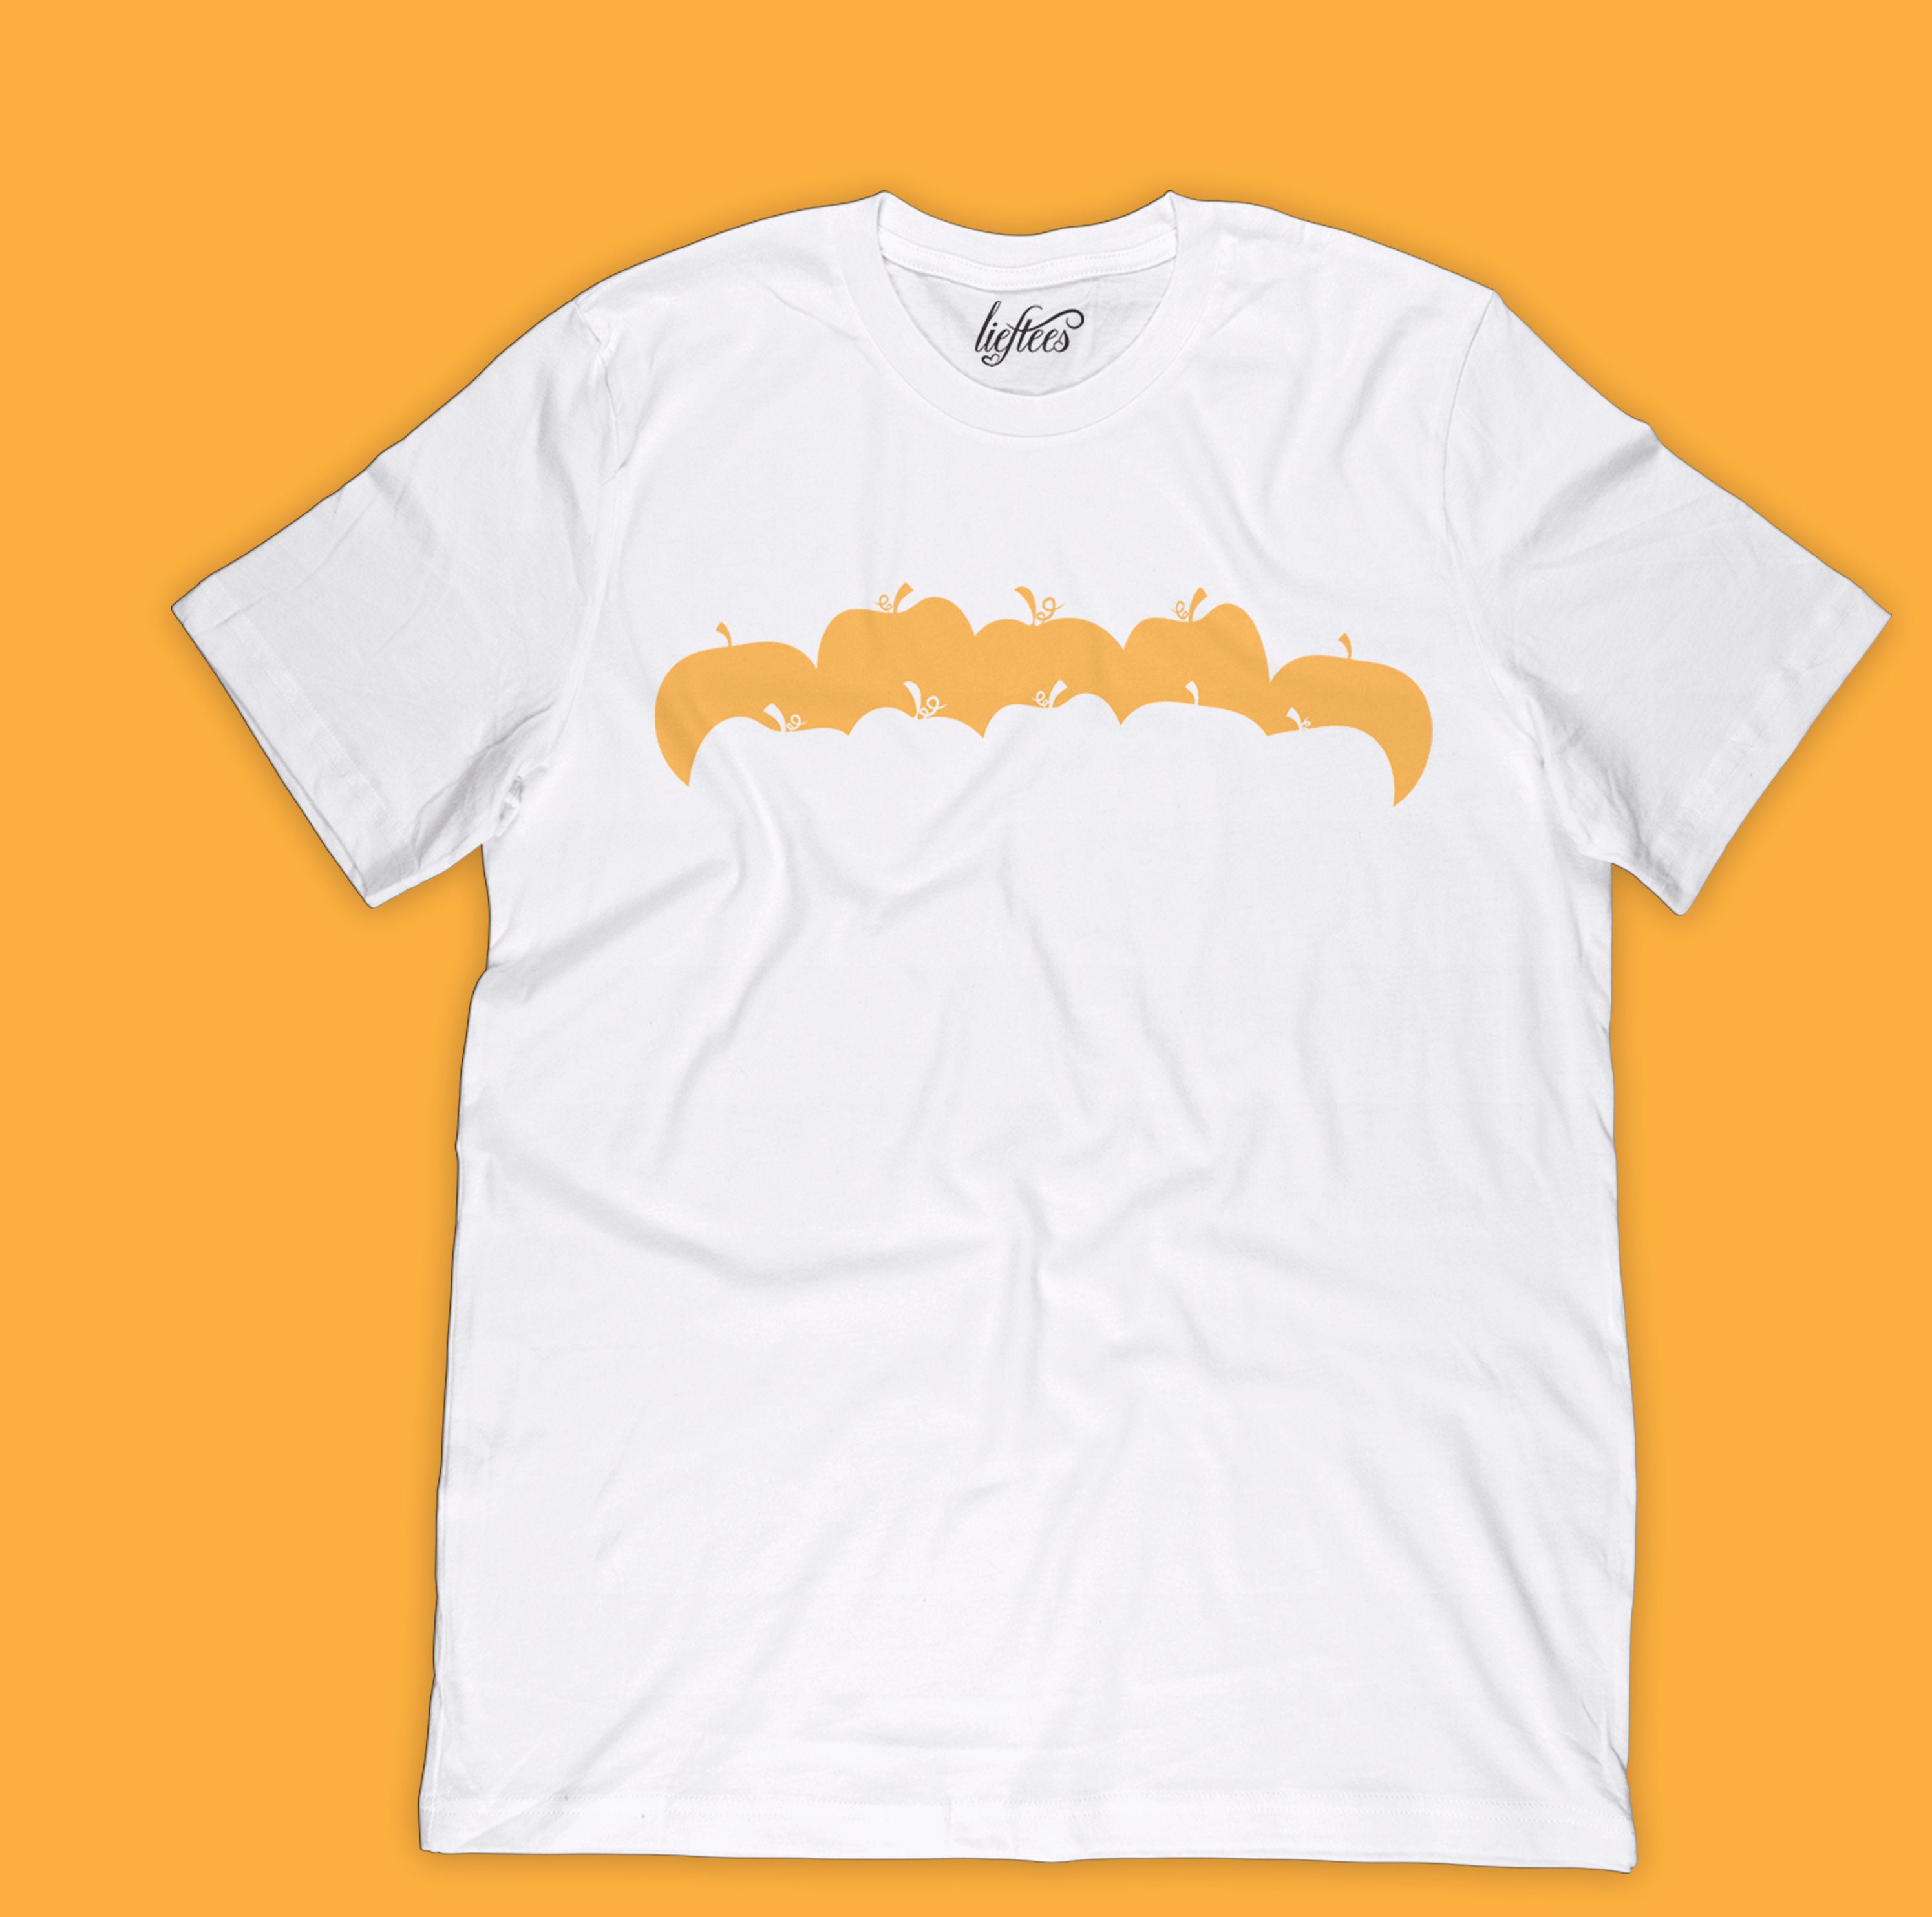 Discover Halloween Pumpkin Patch Shirt  |  Trick or Treat T-shirt  |  Perfect Halloween Gift  |  Unique Graphic Design  |  Fall Harvest